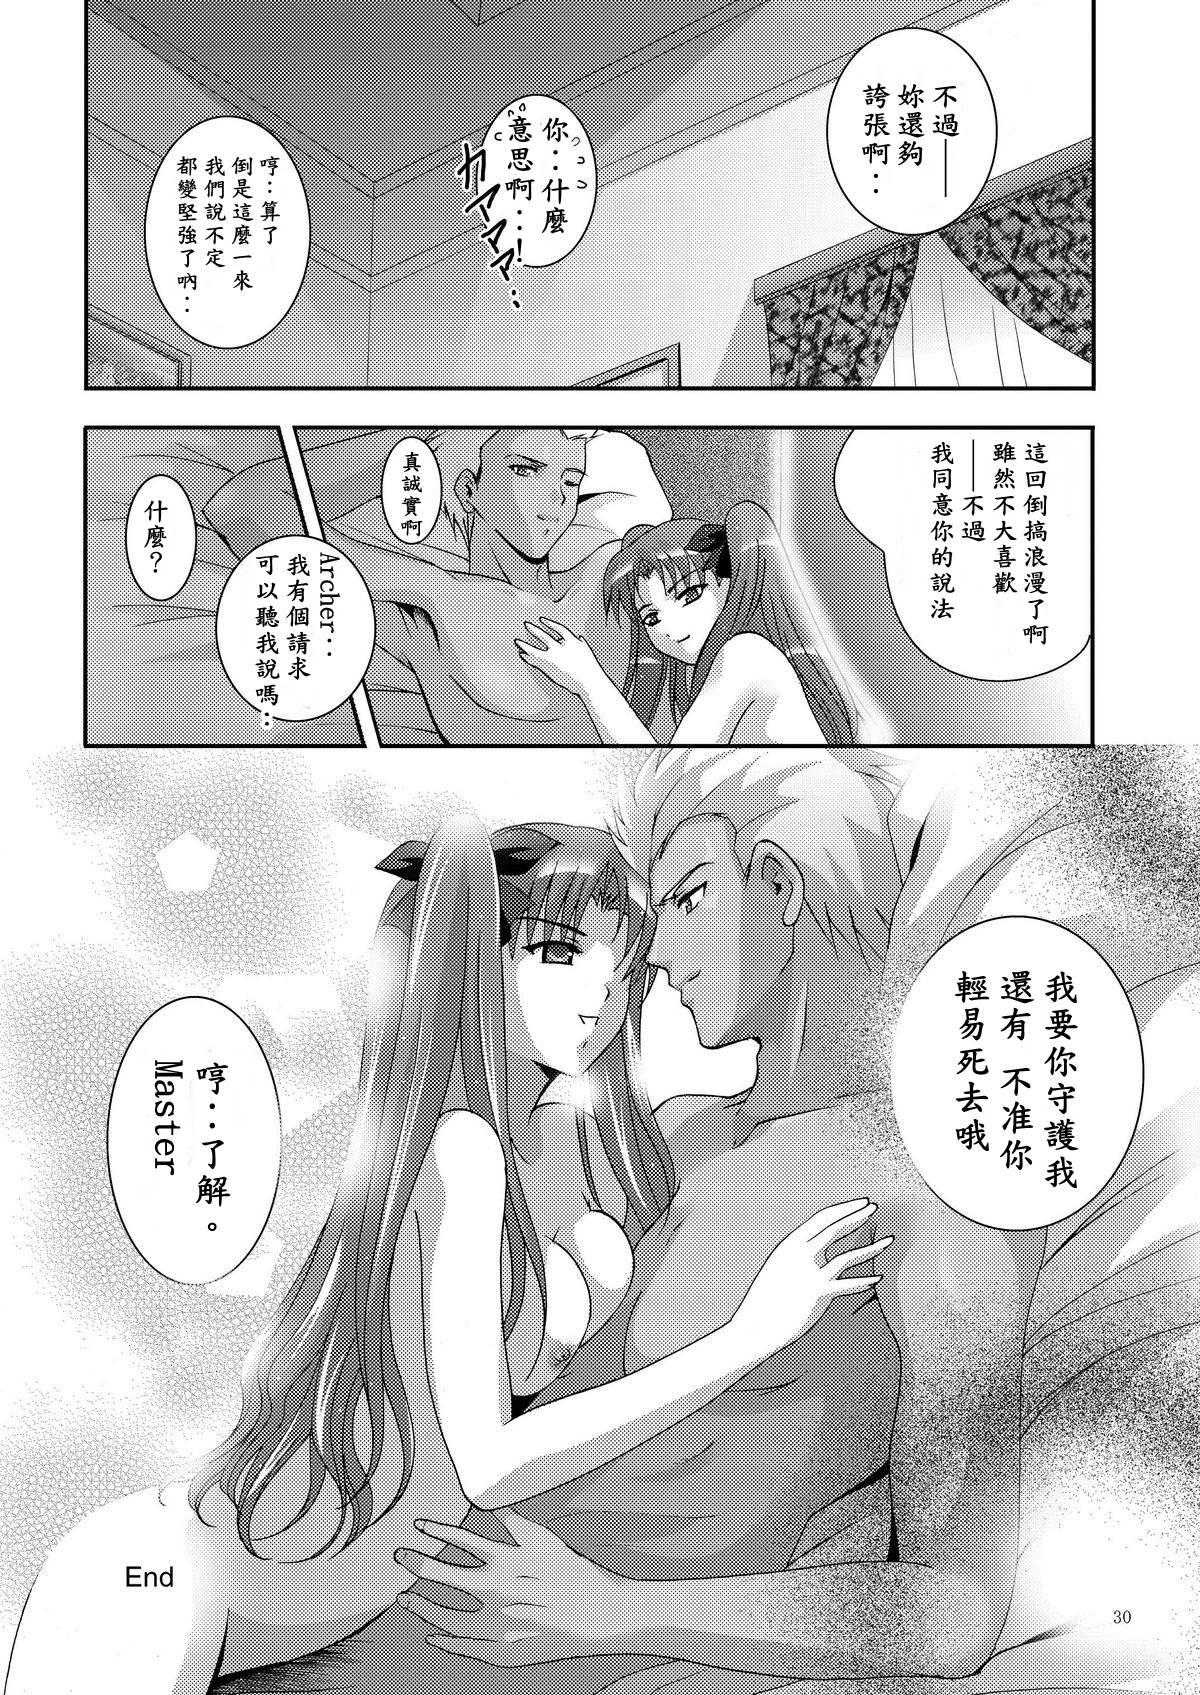 Boots MOUSOU THEATER 19 - Fate stay night Climax - Page 28